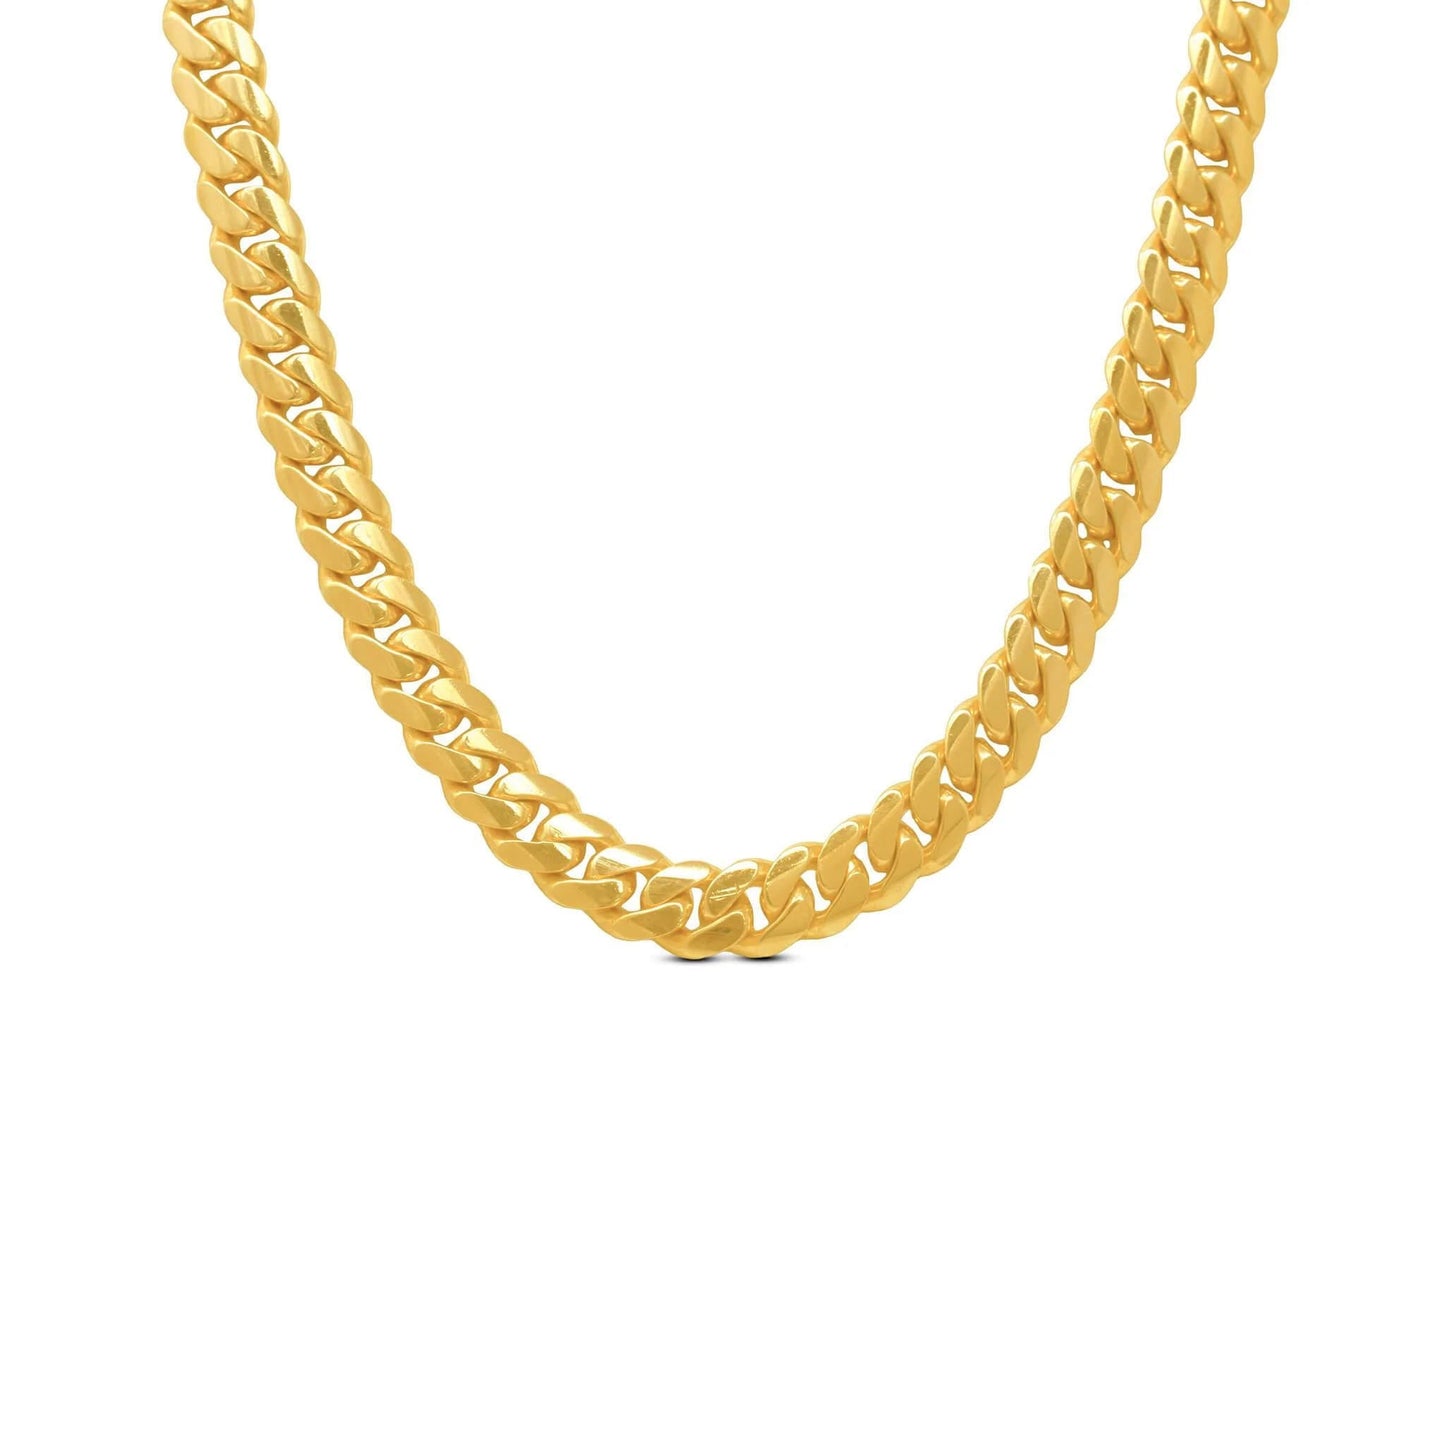 20mm Miami Cuban Link Bracelet in 10K Solid Yellow Gold - Vera Jewelry in Miami